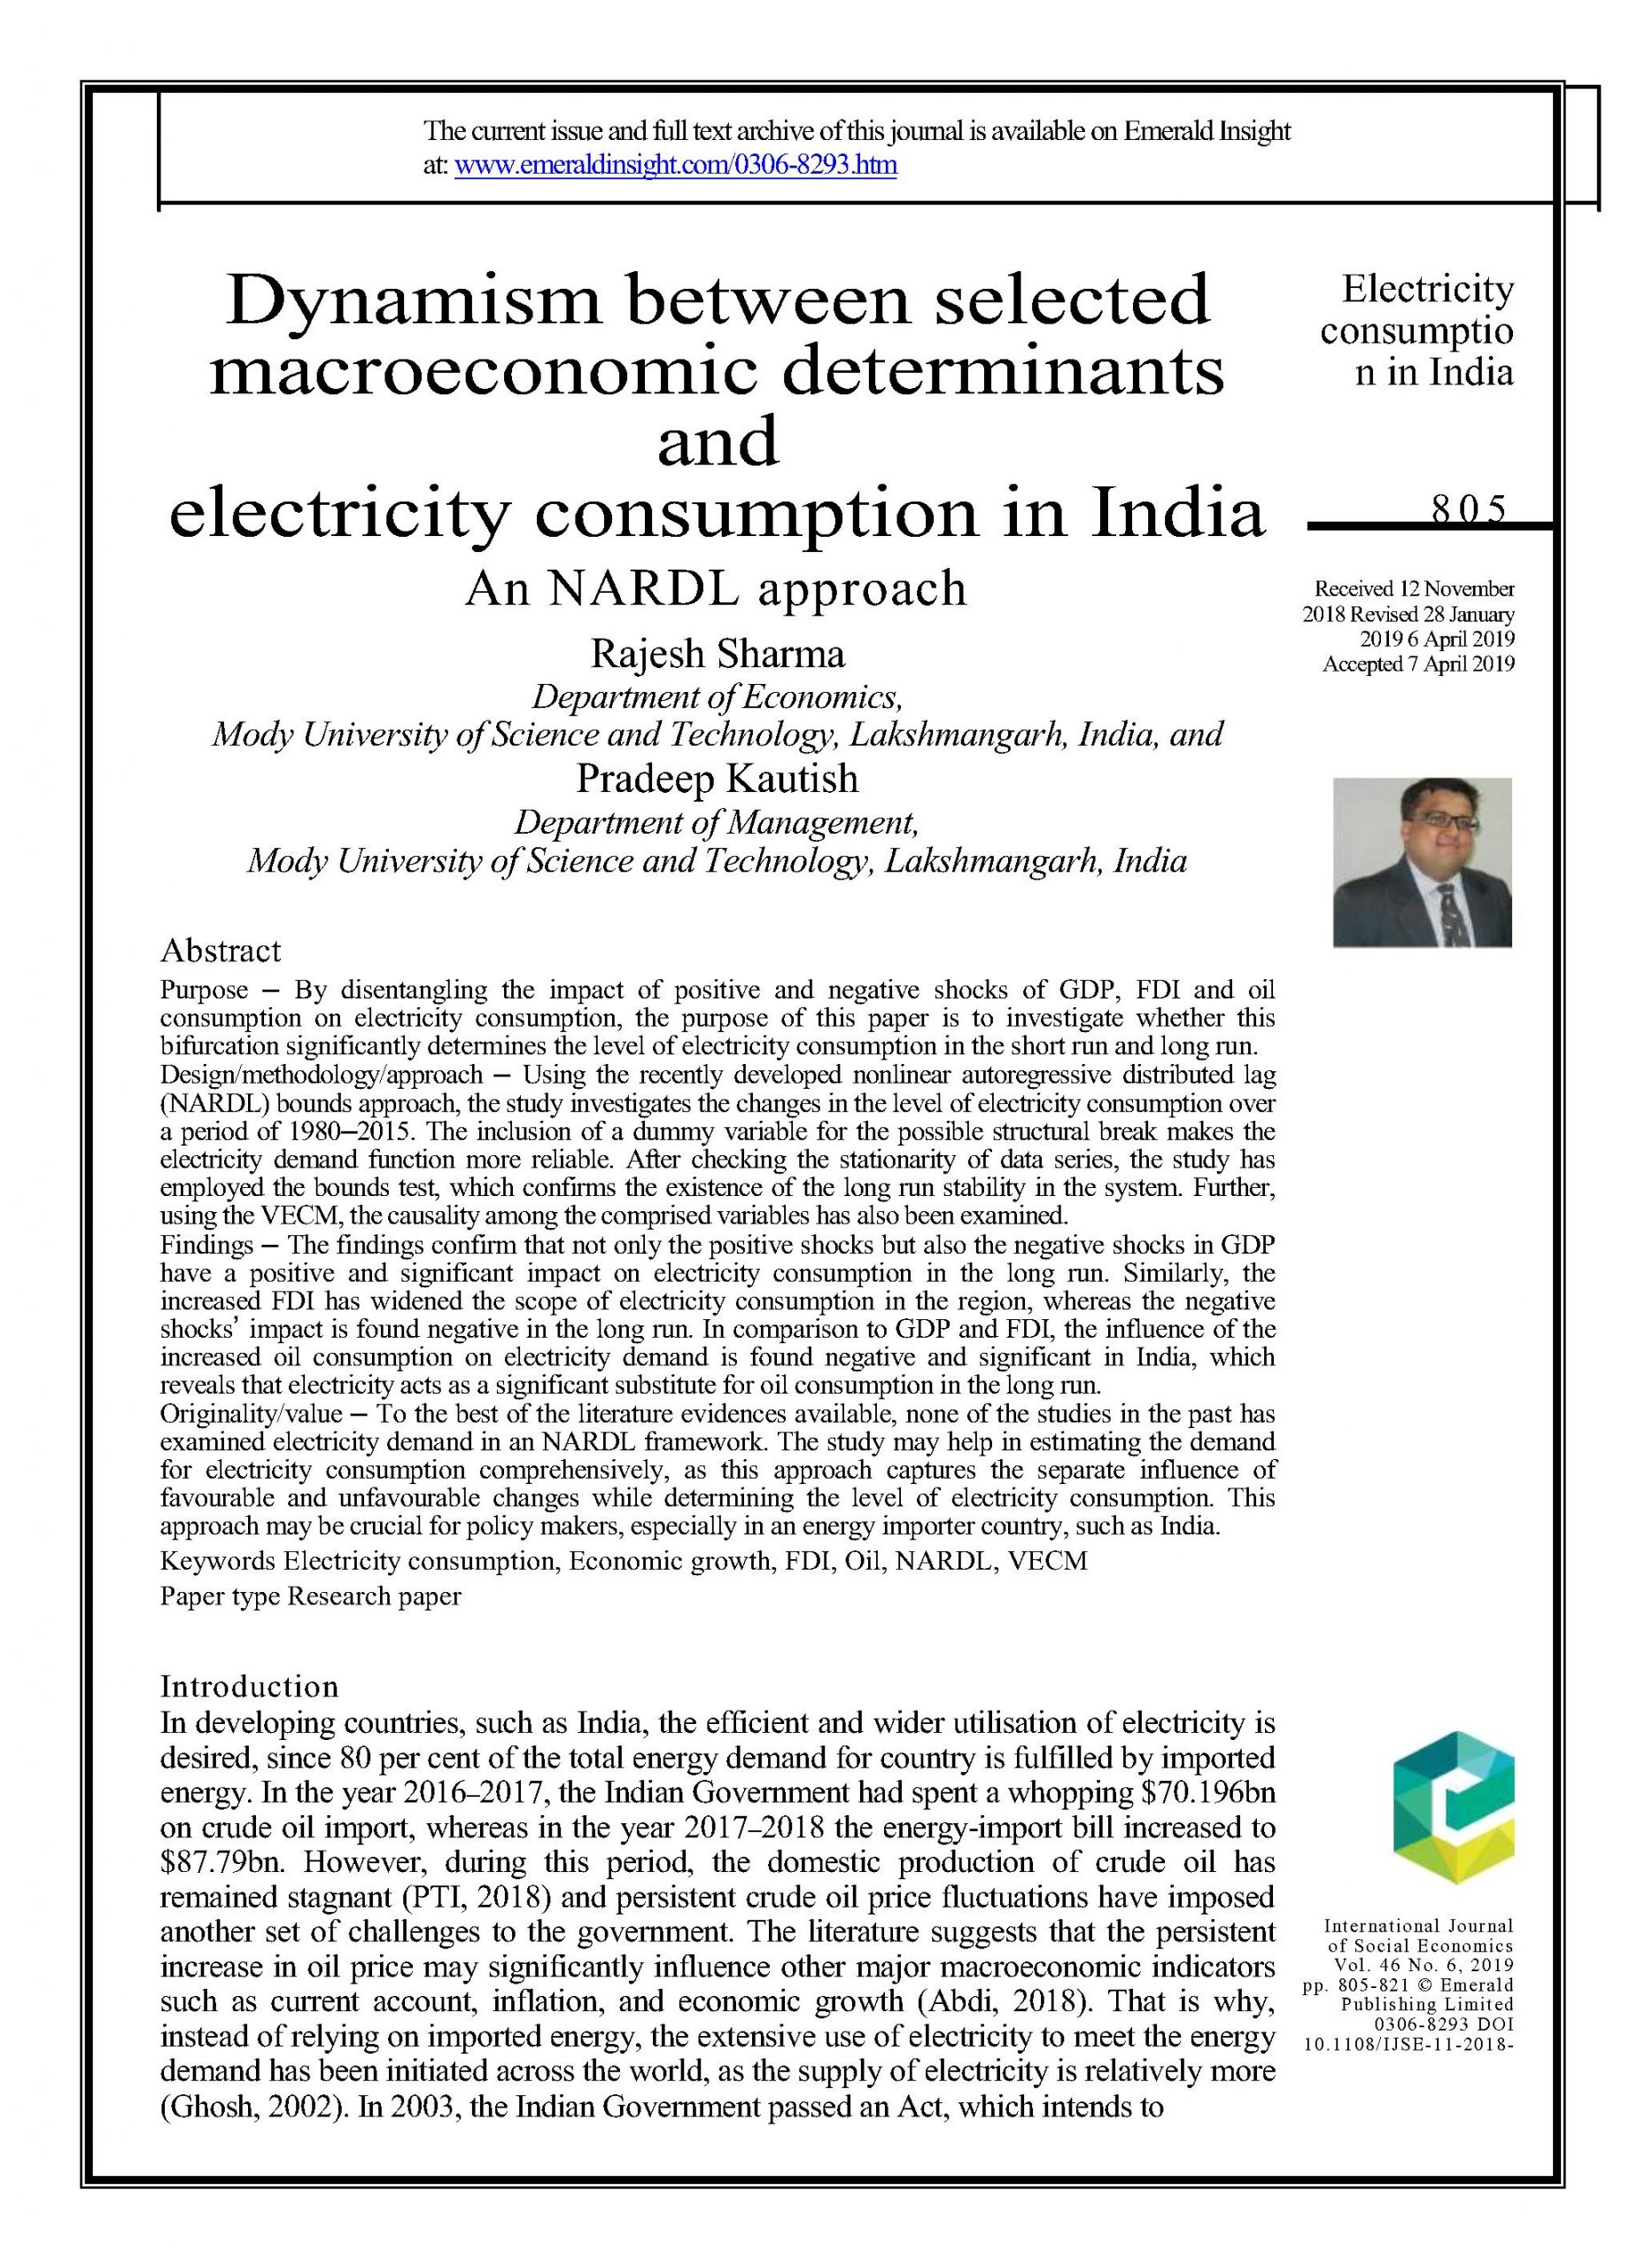 Dynamism between selected macroeconomic determinants and electricity consumption in India: An NARDL approach